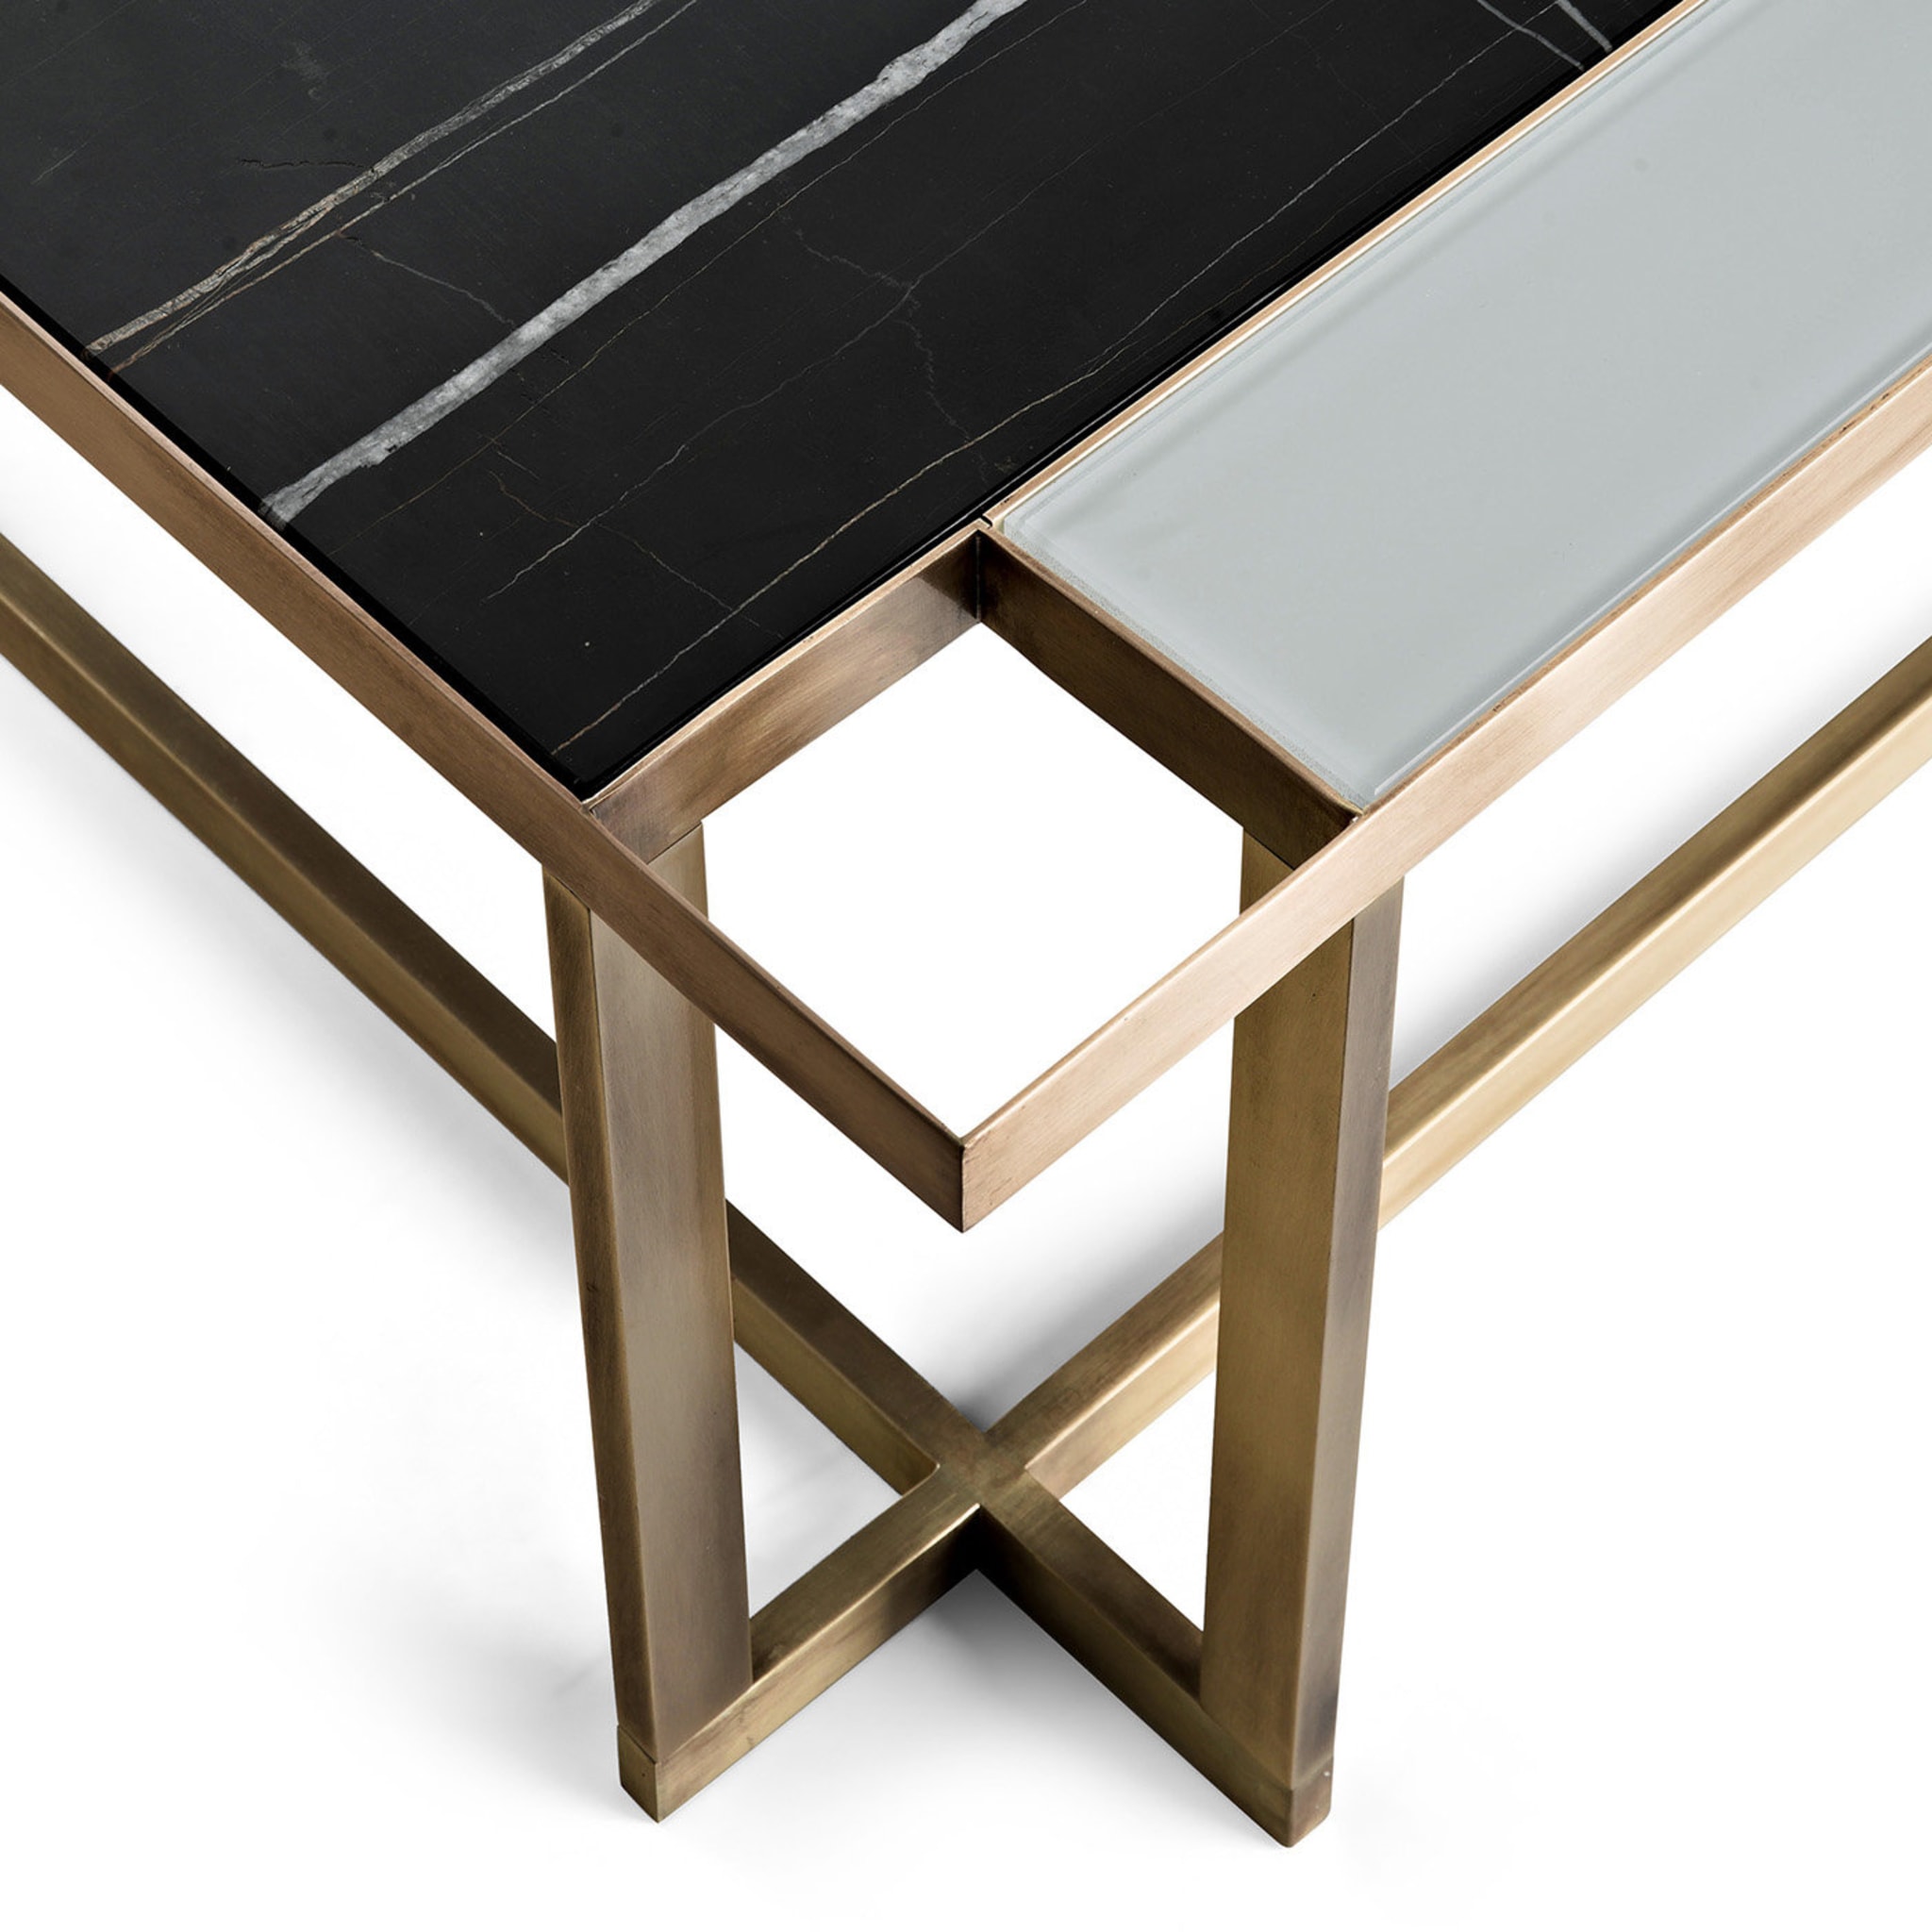 Gary Square Coffee Table - Alternative view 2